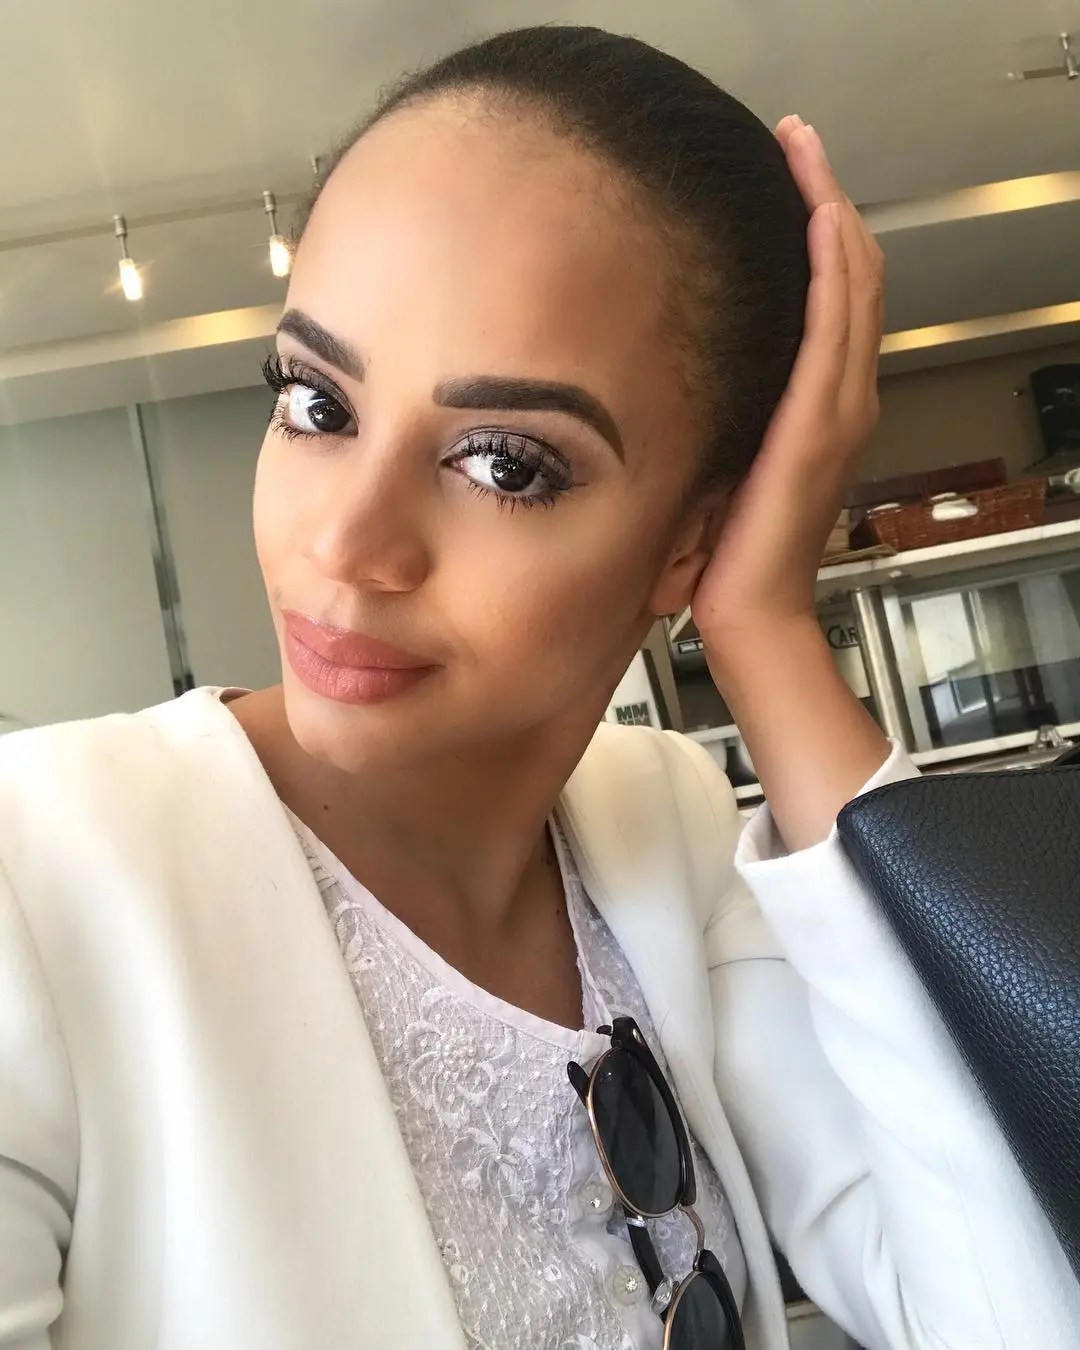 Real Housewives Of Johannesburg star Naledi Willers has died